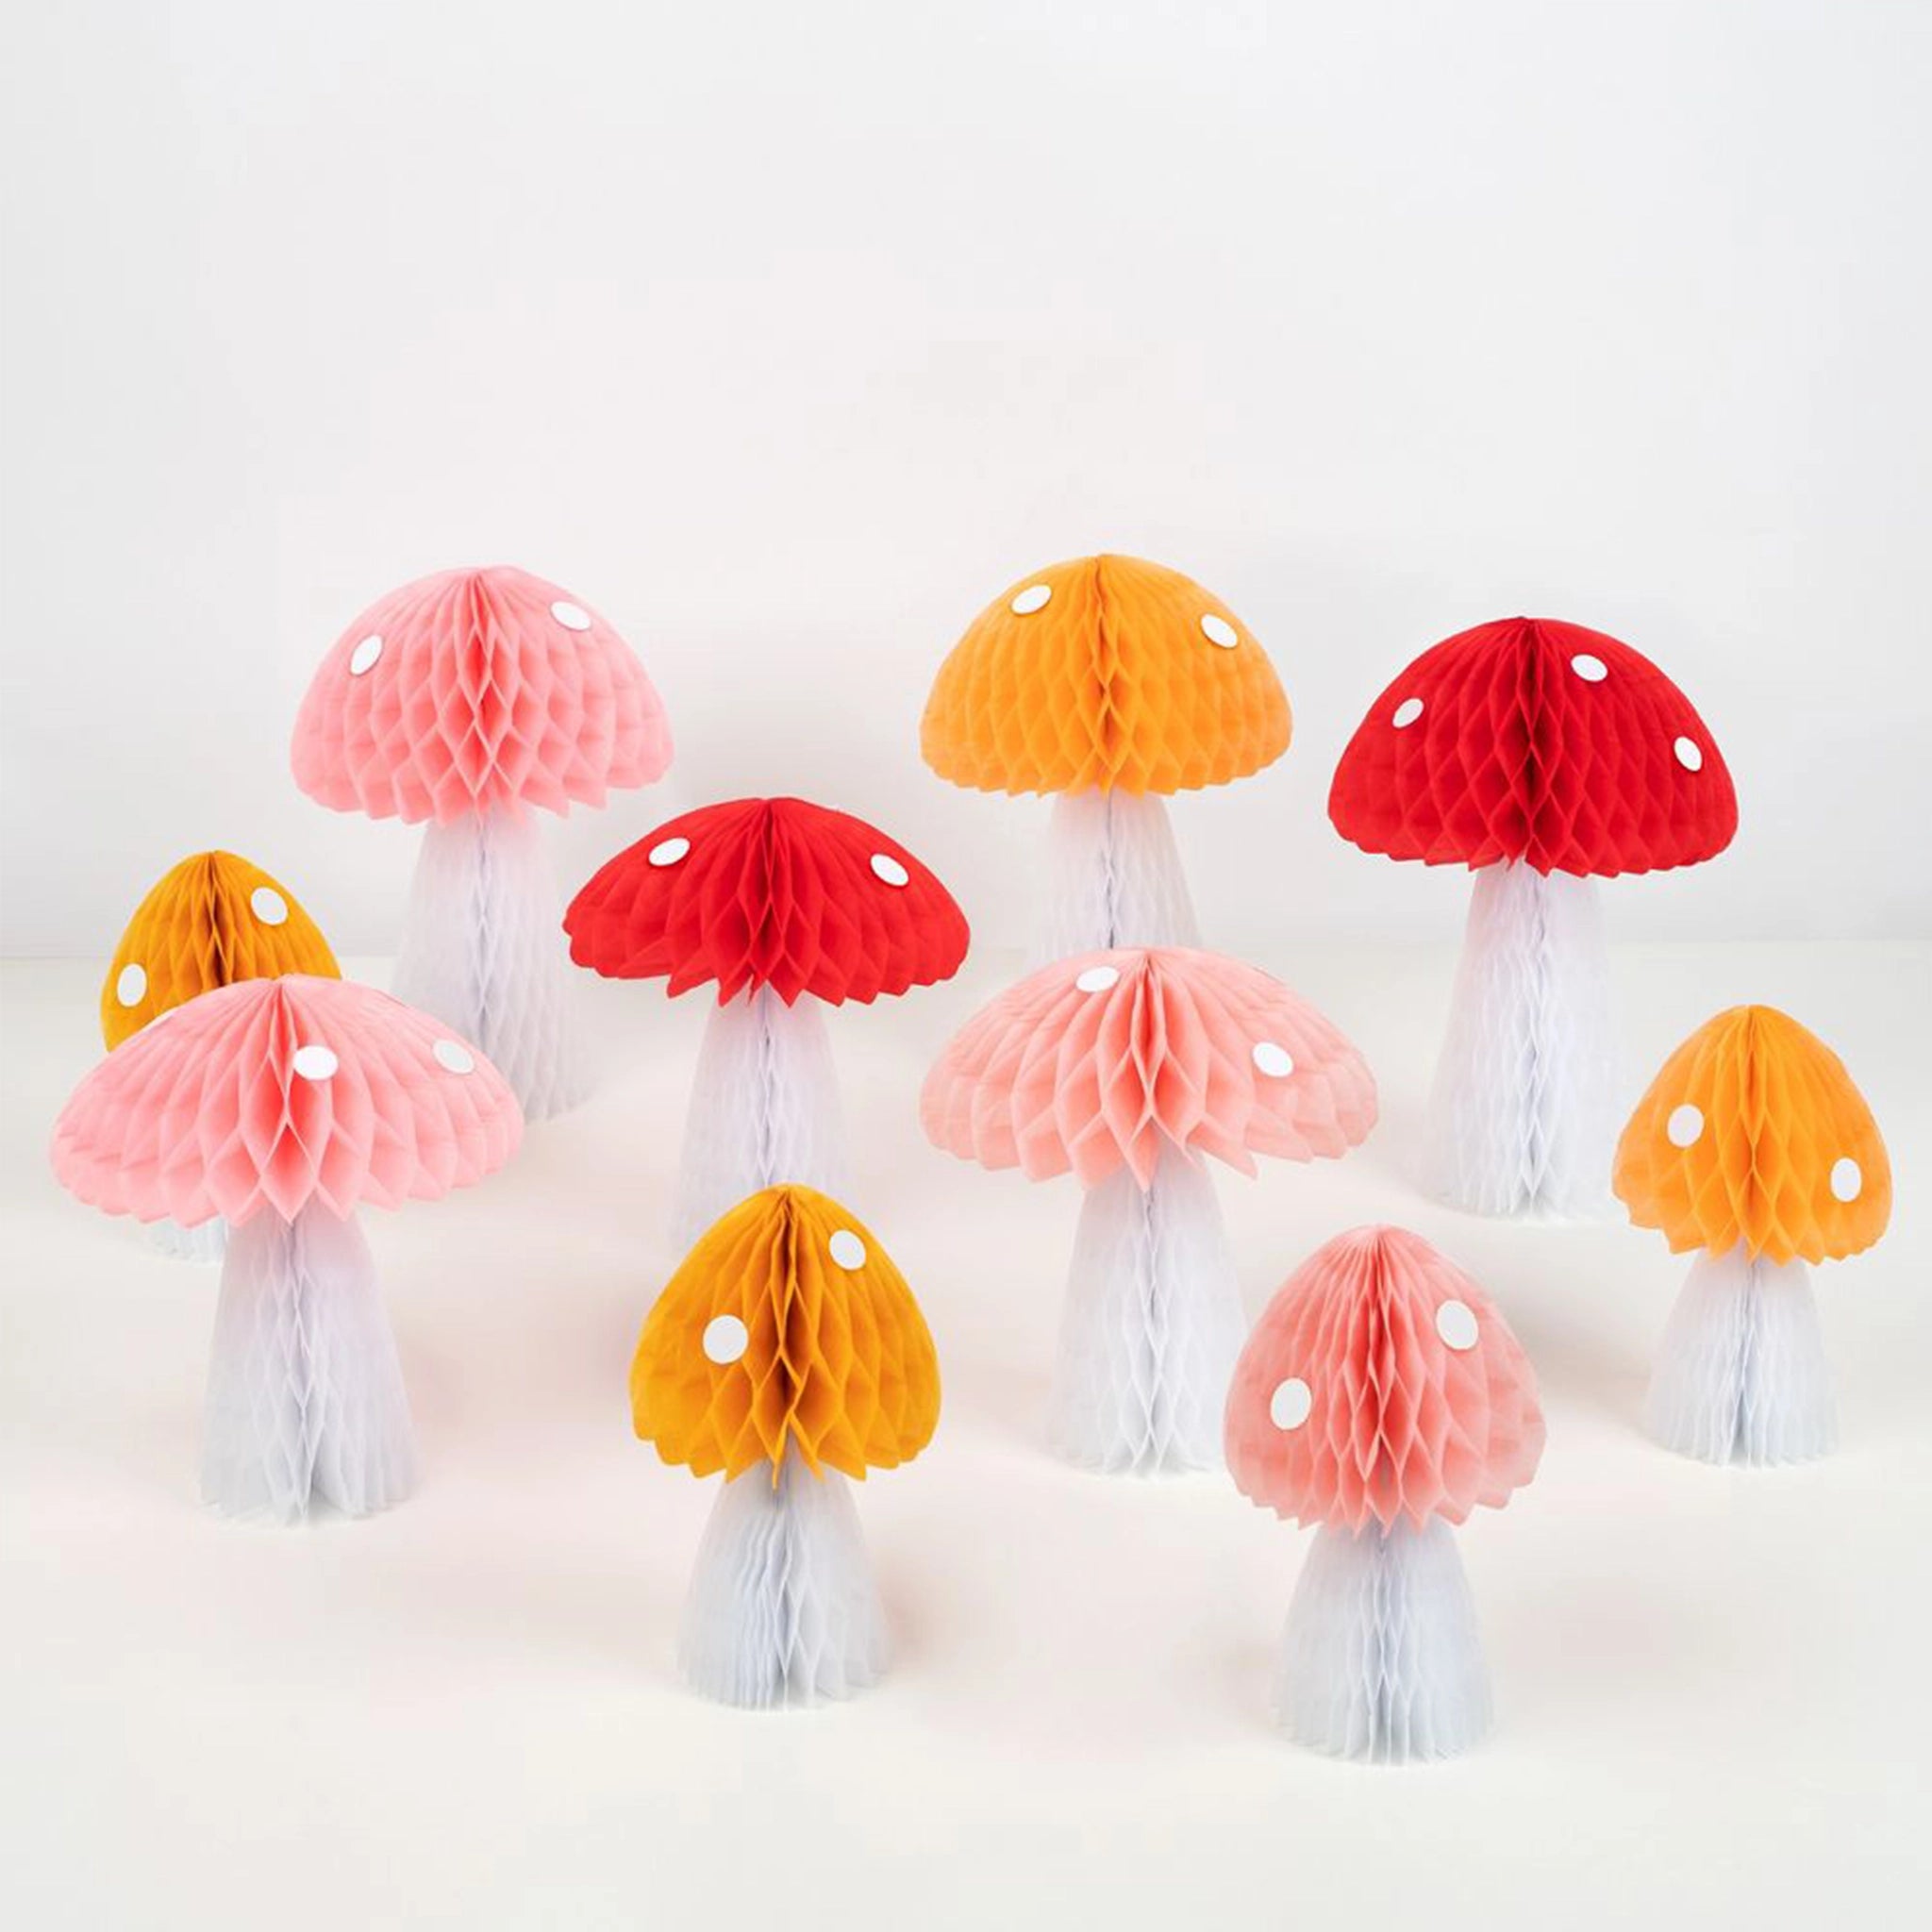 A variety of honeycomb mushroom decorations on a tablescape. There are pink, red and yellow mushrooms with white dots.